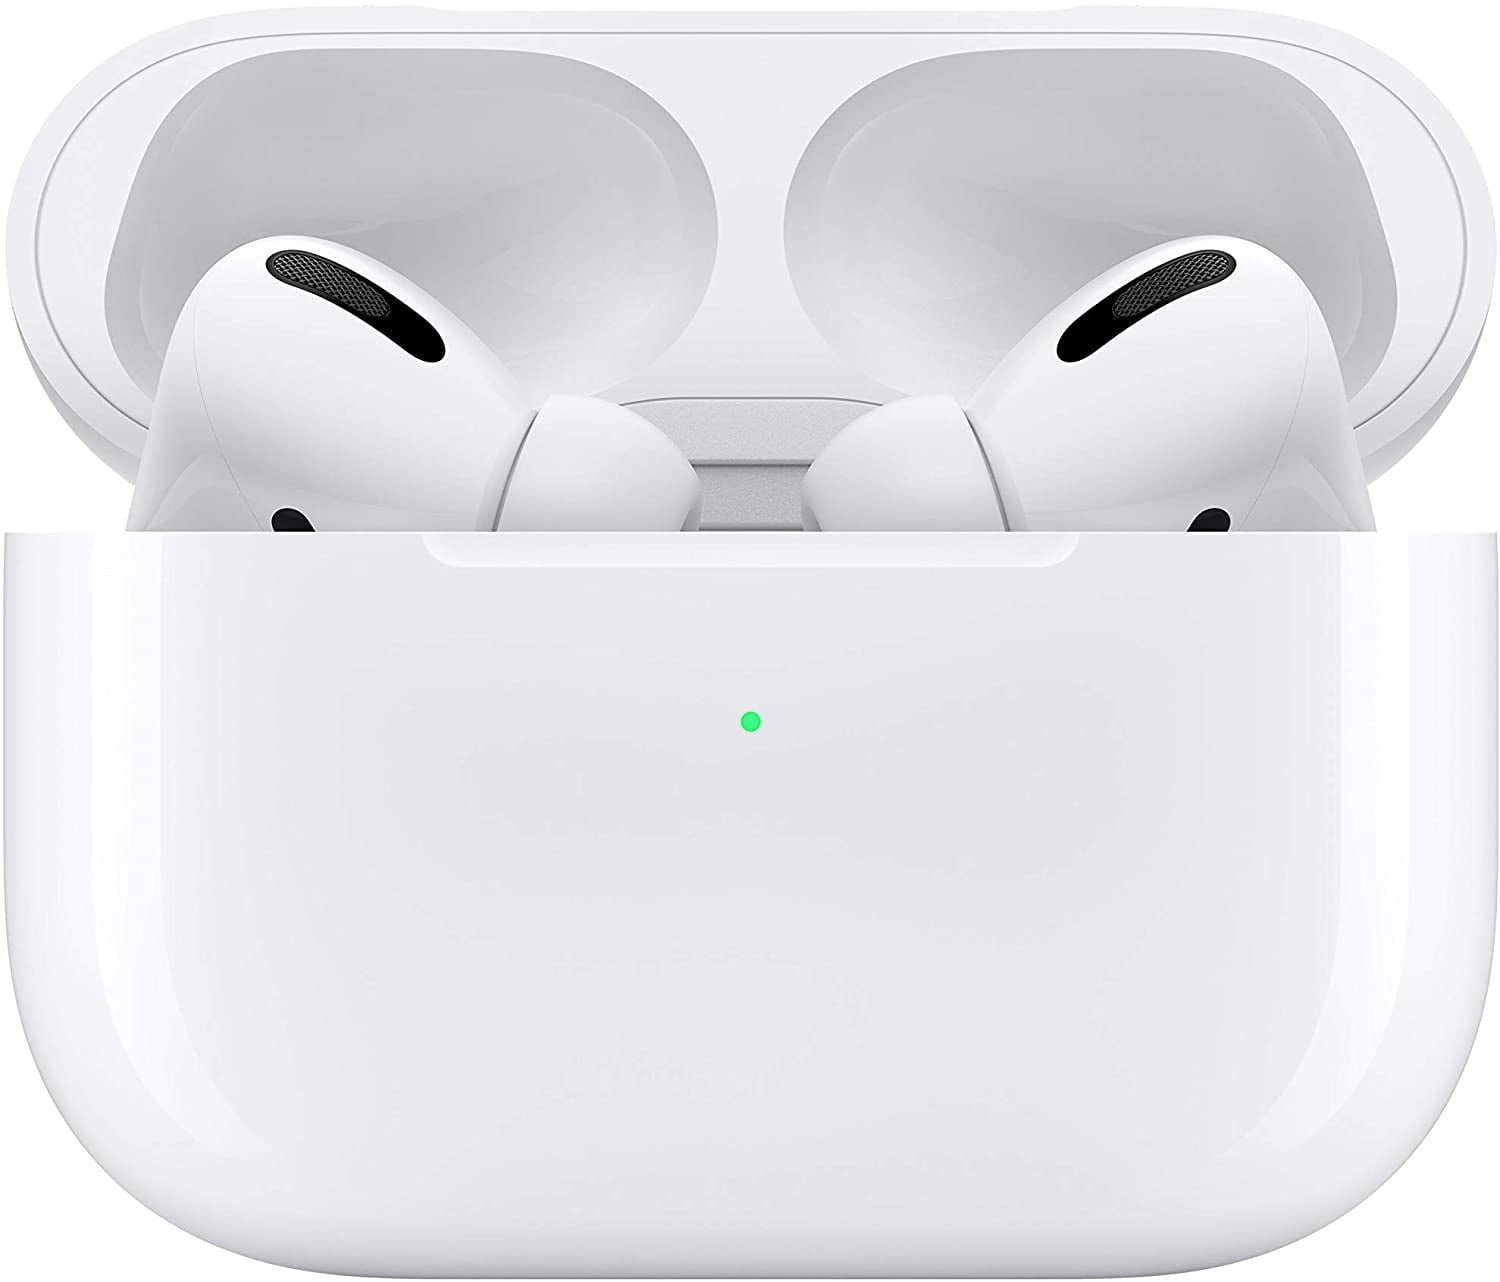 Apple Airpods Pro with Wireless Charging Case - Open Box